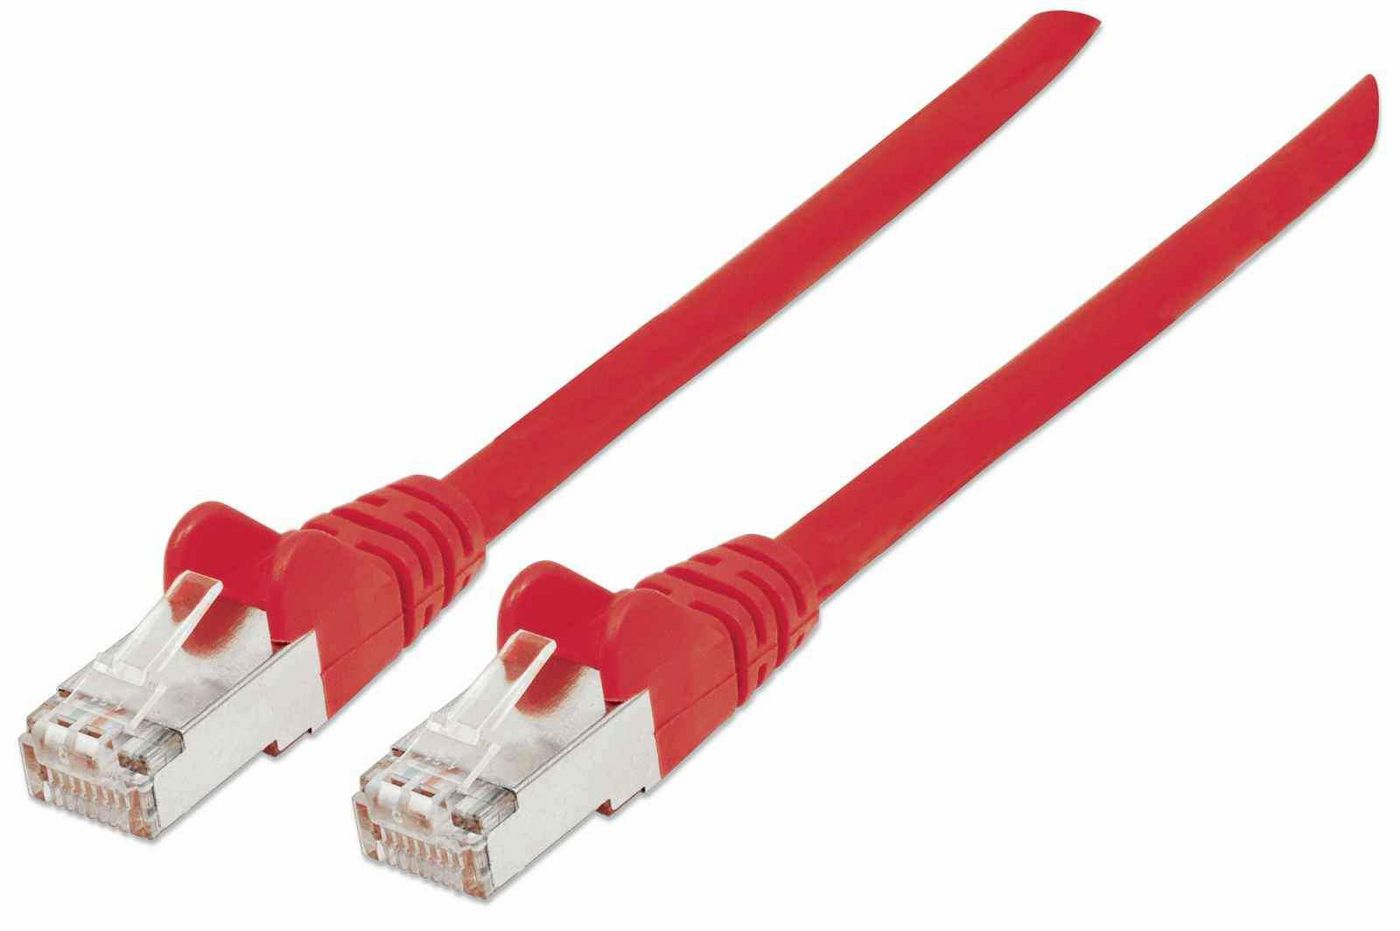 Intellinet 741064 High Performance Network Cable 